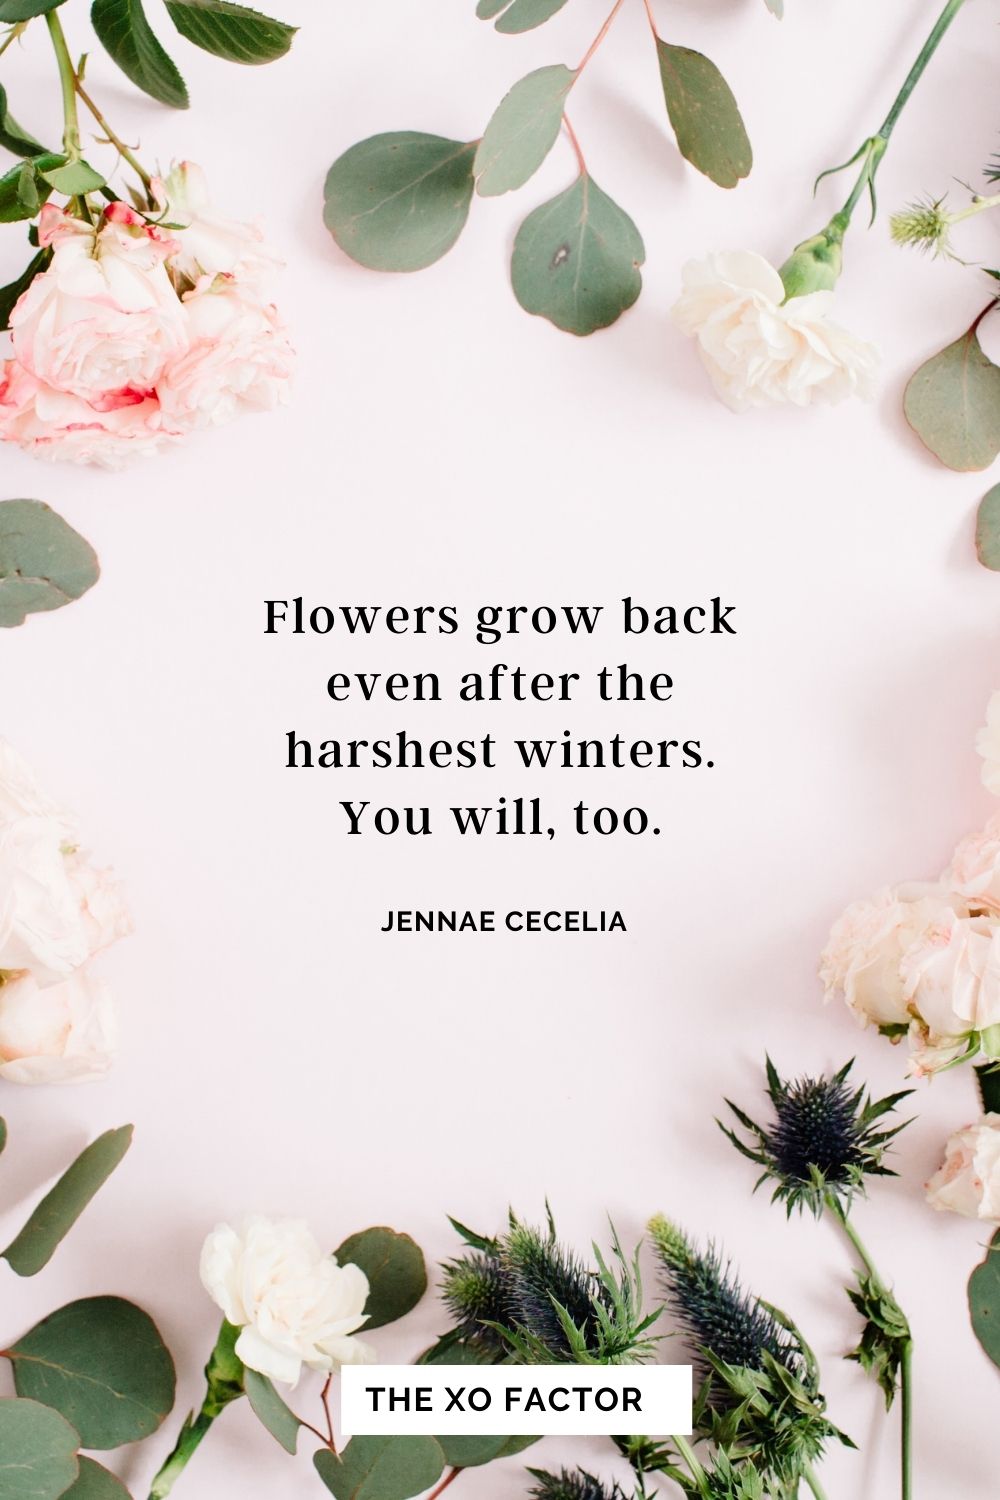 Flowers grow back even after the harshest winters. You will, too. Jennae Cecelia